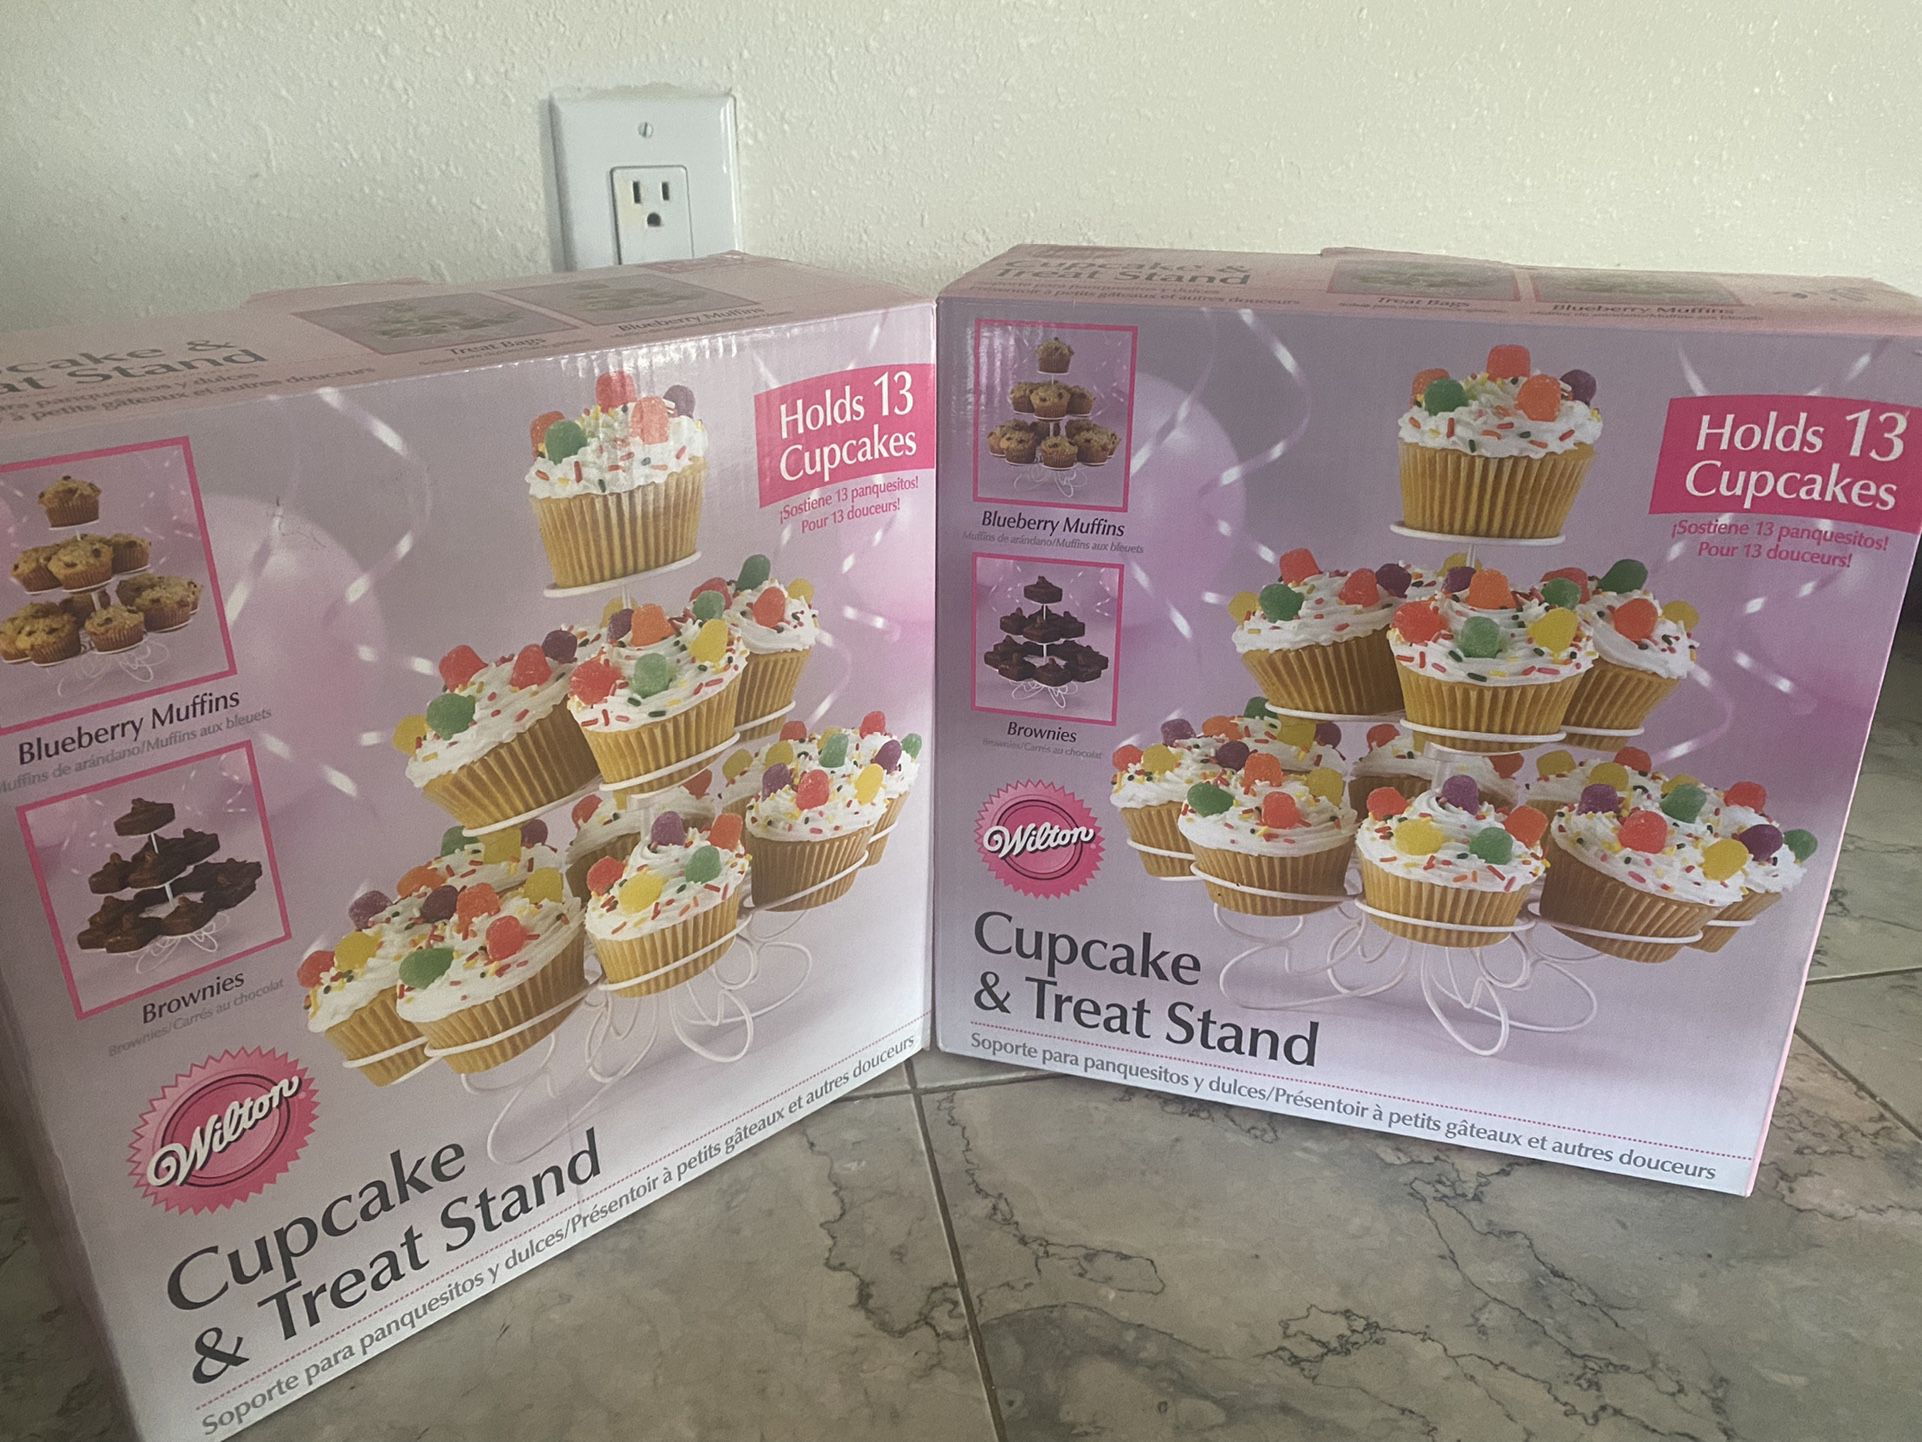 2 Cupcake & Treat Stands